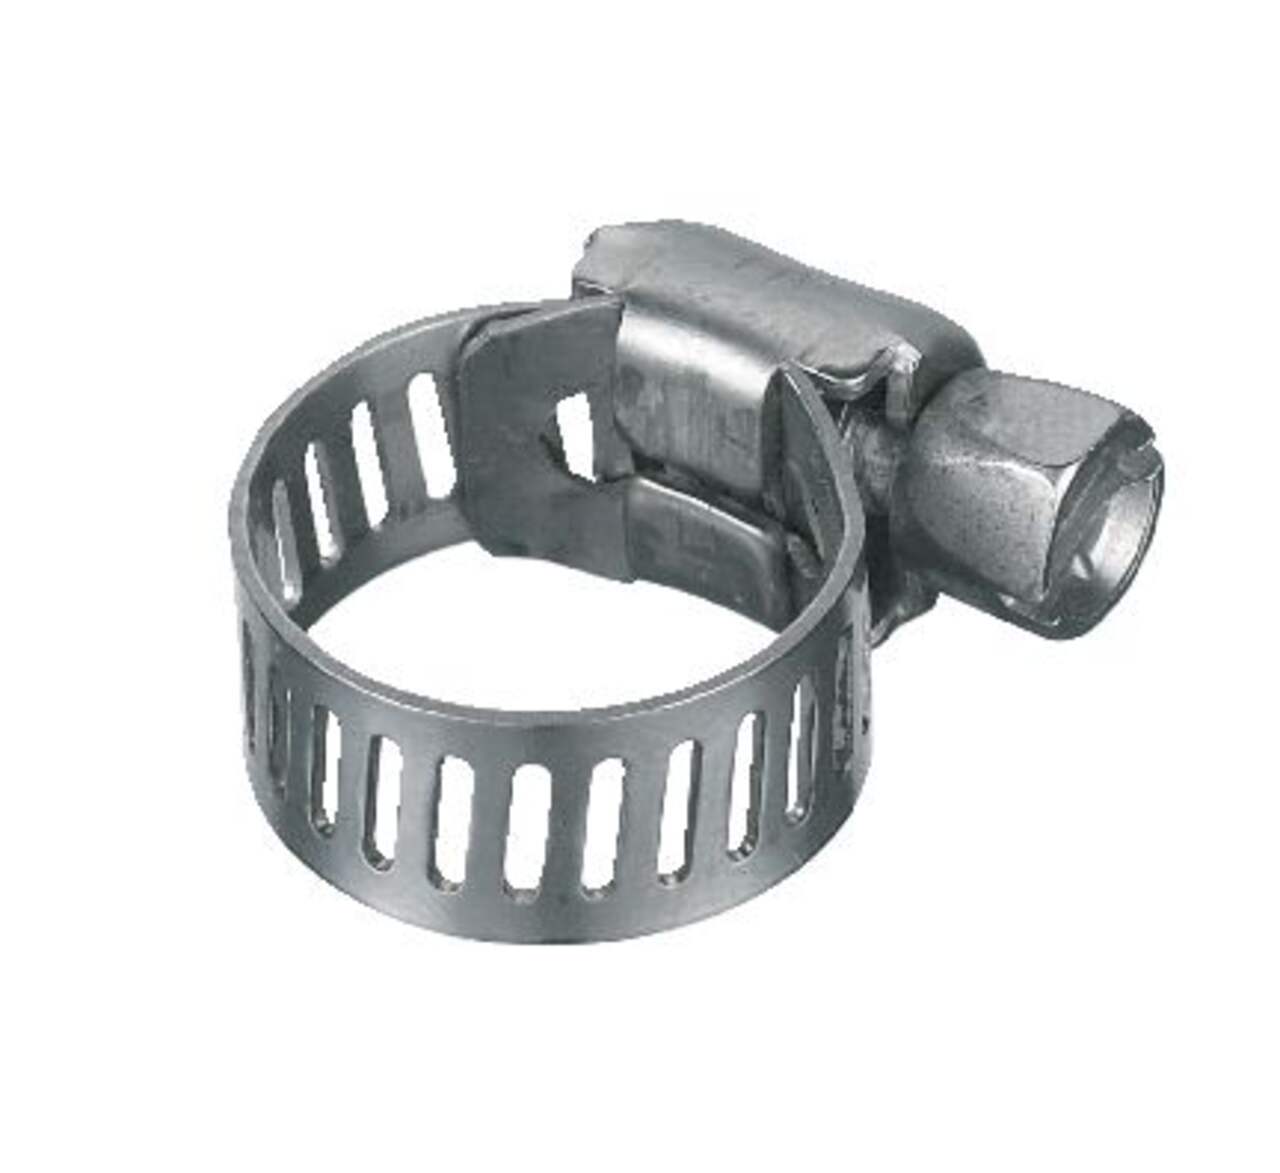 PlumbShop Stainless Steel Gear Hose Clamp for Hose Fitting, Assorted Sizes